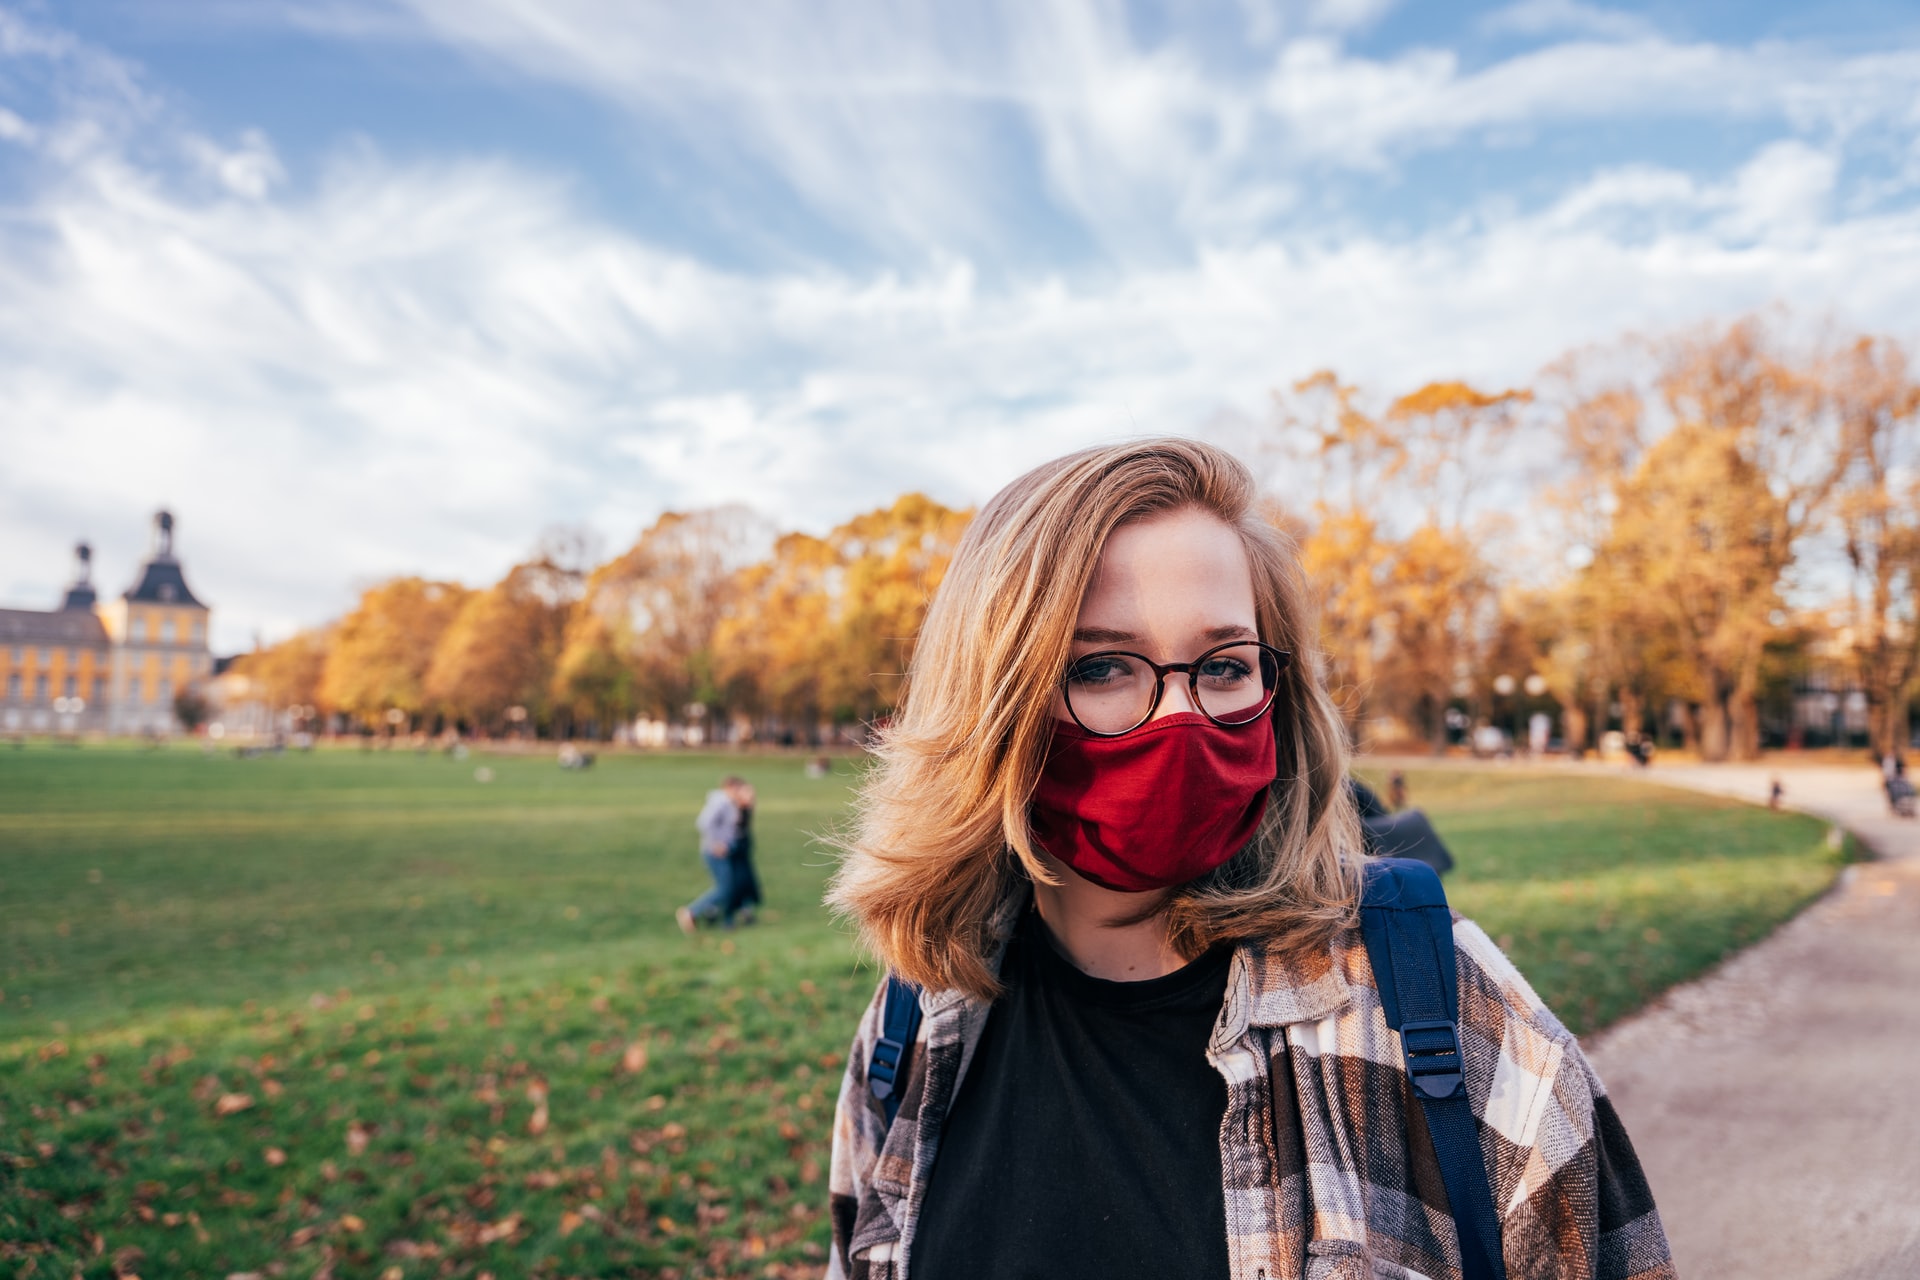 Woman with short blonde hair, standing in a park. Wearing a red cloth mask and a checkered flannel.